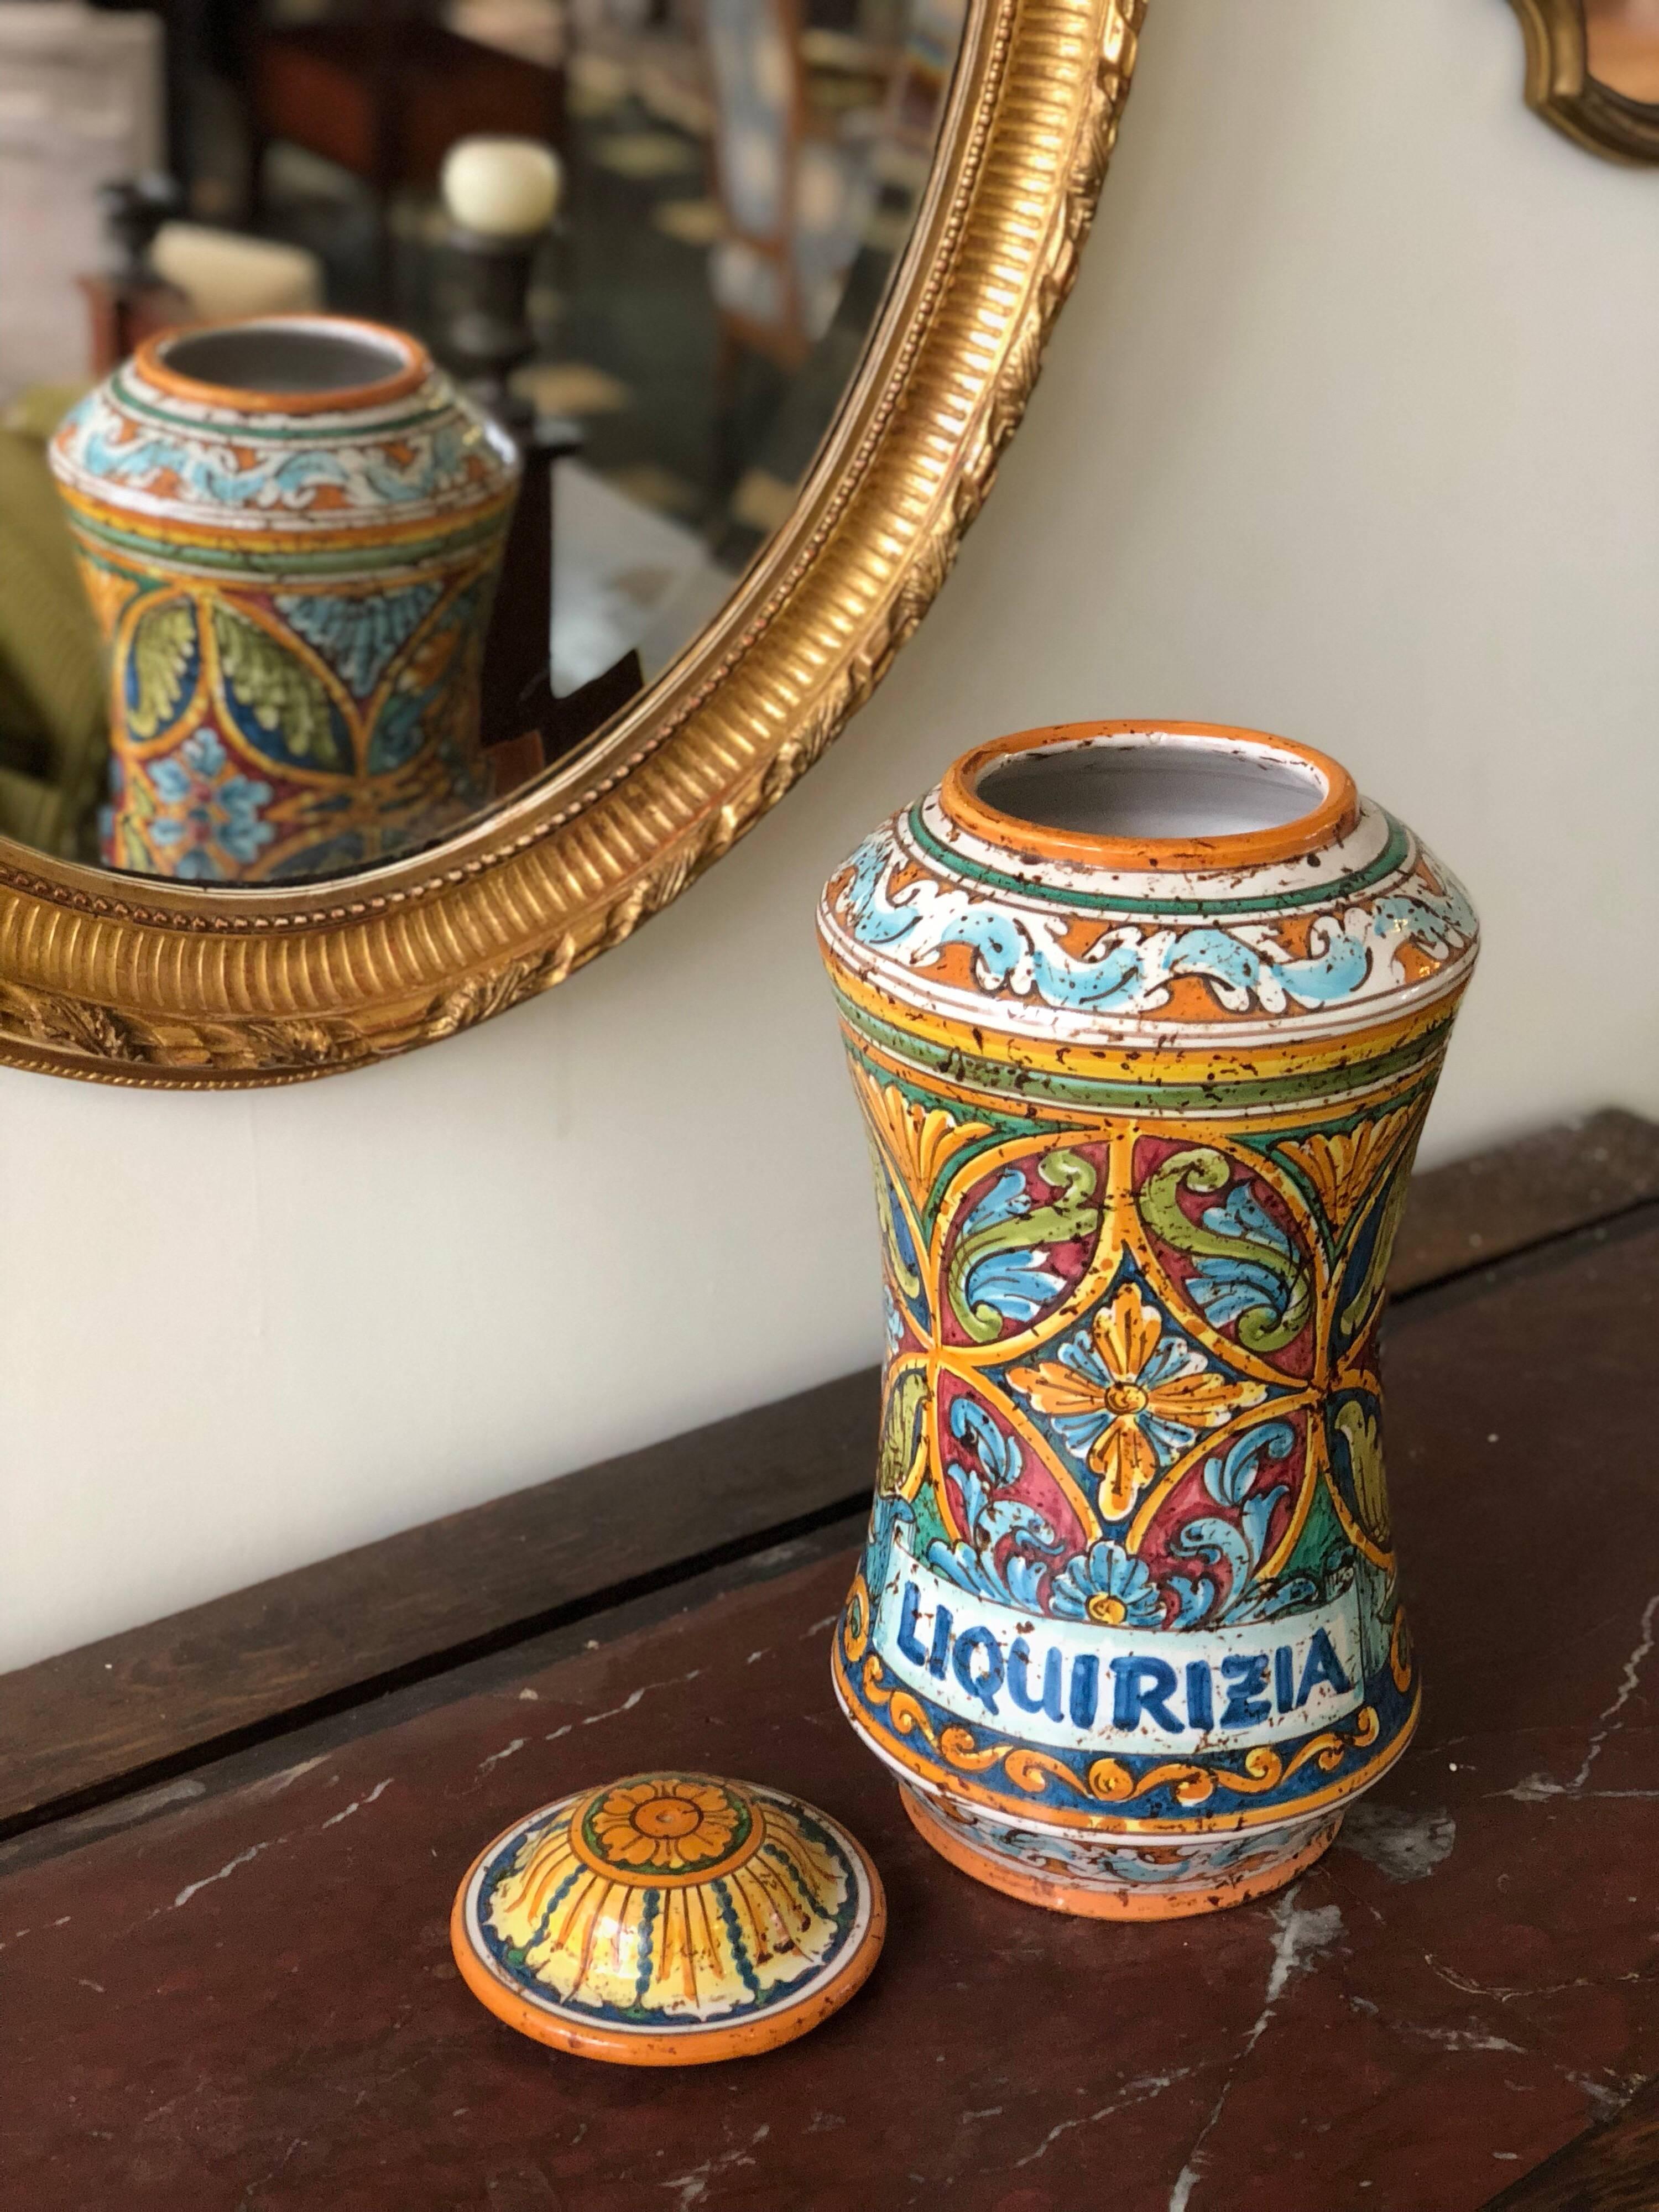 Worldwide Free Shipping 

Caltagirone is one of the most lively Baroque towns in central Sicily. It’s known in Italy as “The city of Sicilian ceramics” due to its thousand-year-old tradition. The name itself, Caltagirone, derives from an Arabic word